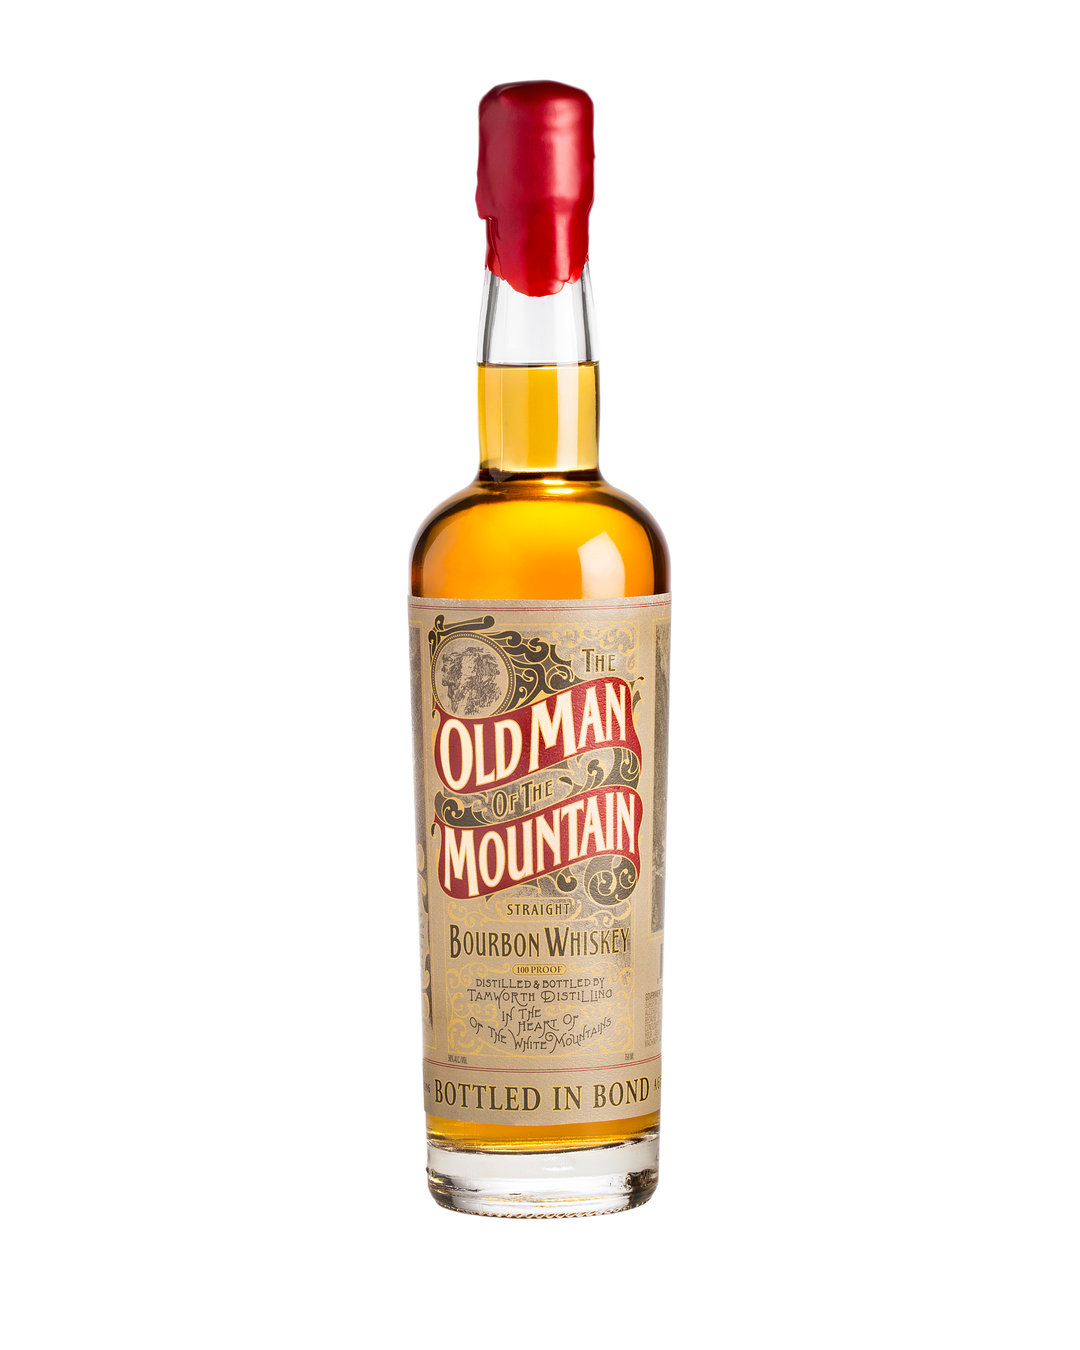 Tamworth Distilling The Old Man of the Mountain, Bottled-in-Bond